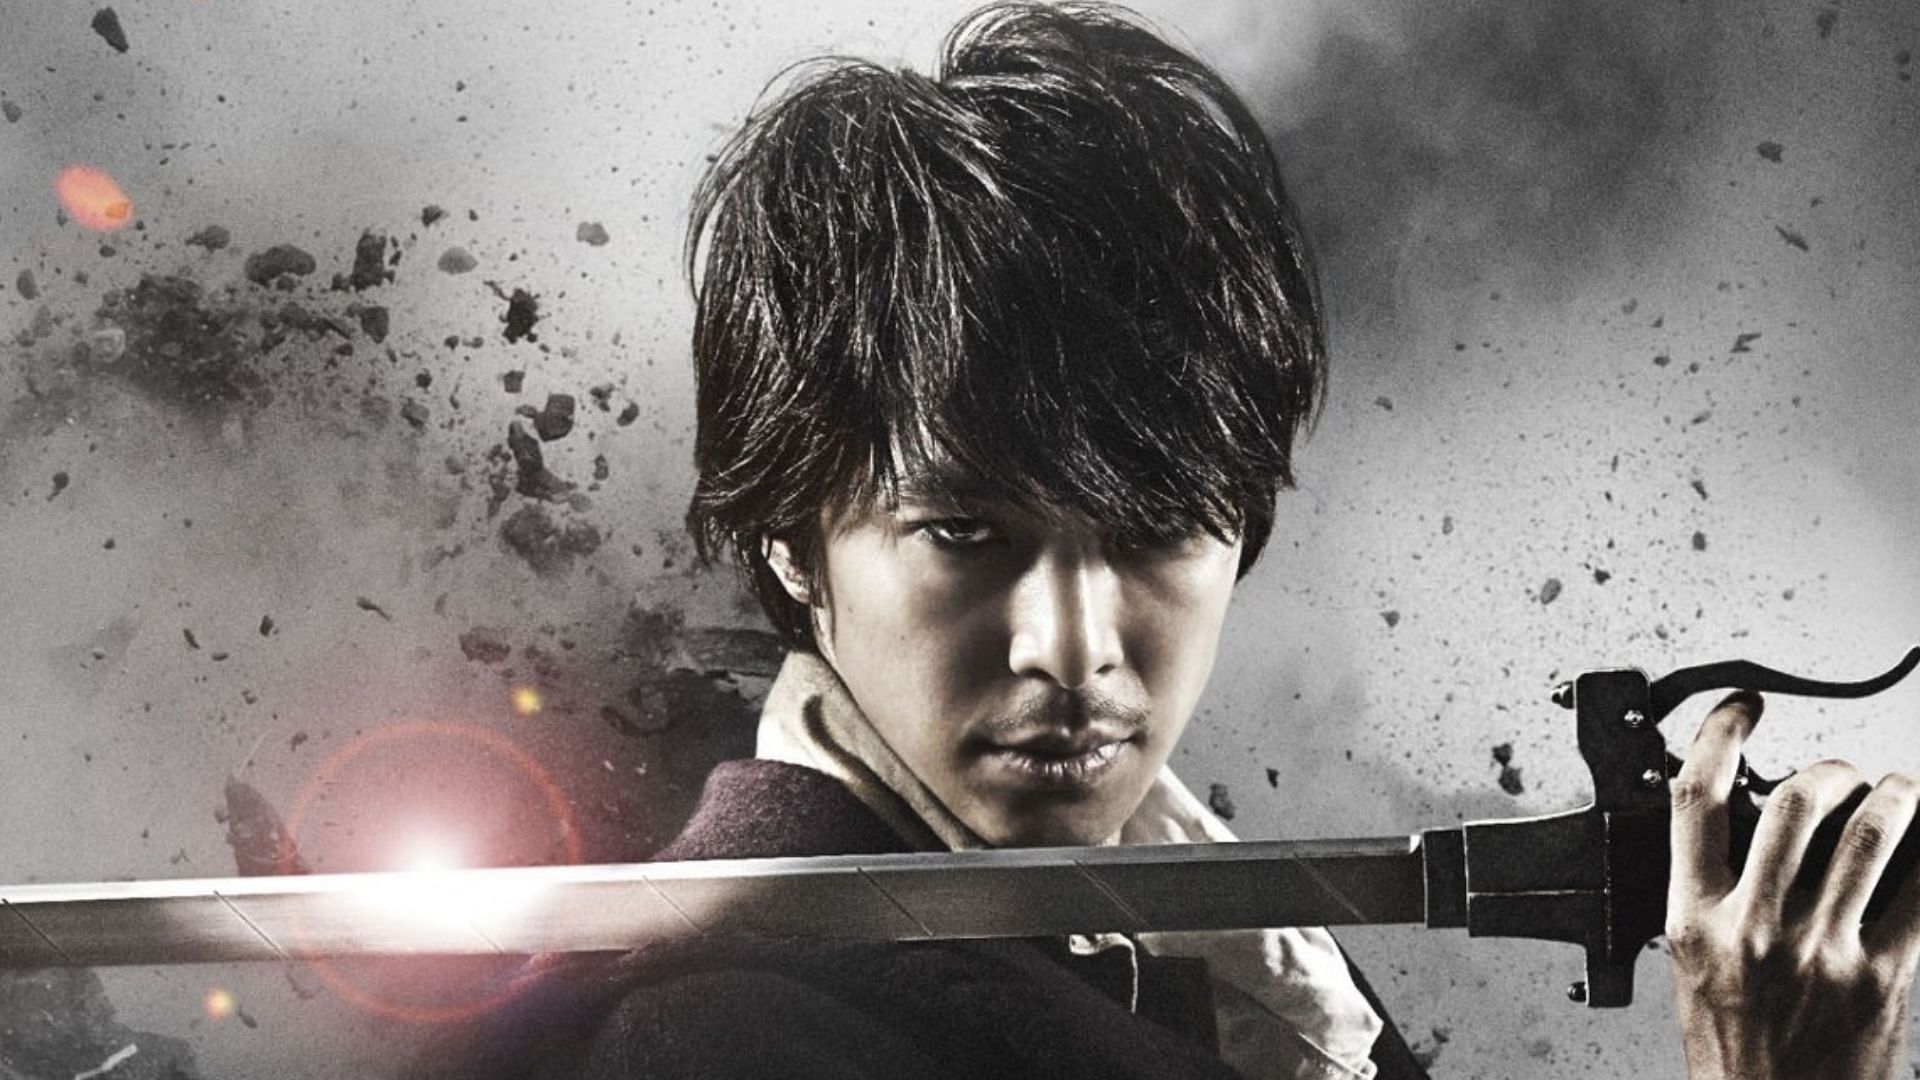 Shikishima, as seen in the movie promotional posters (Image via TOHO Pictures)